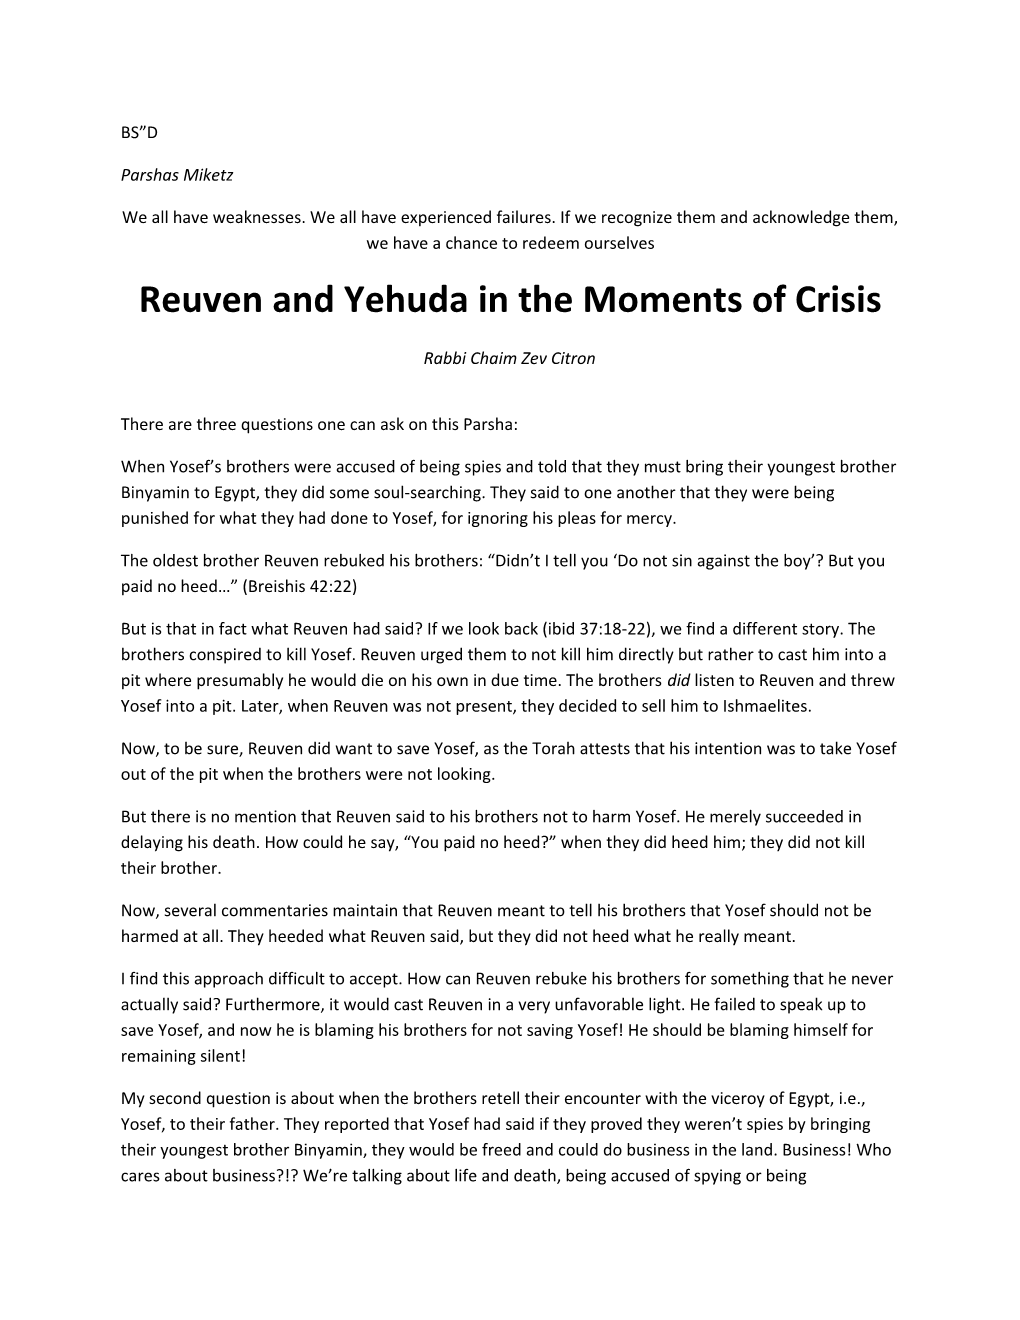 Reuven and Yehuda in the Moments of Crisis